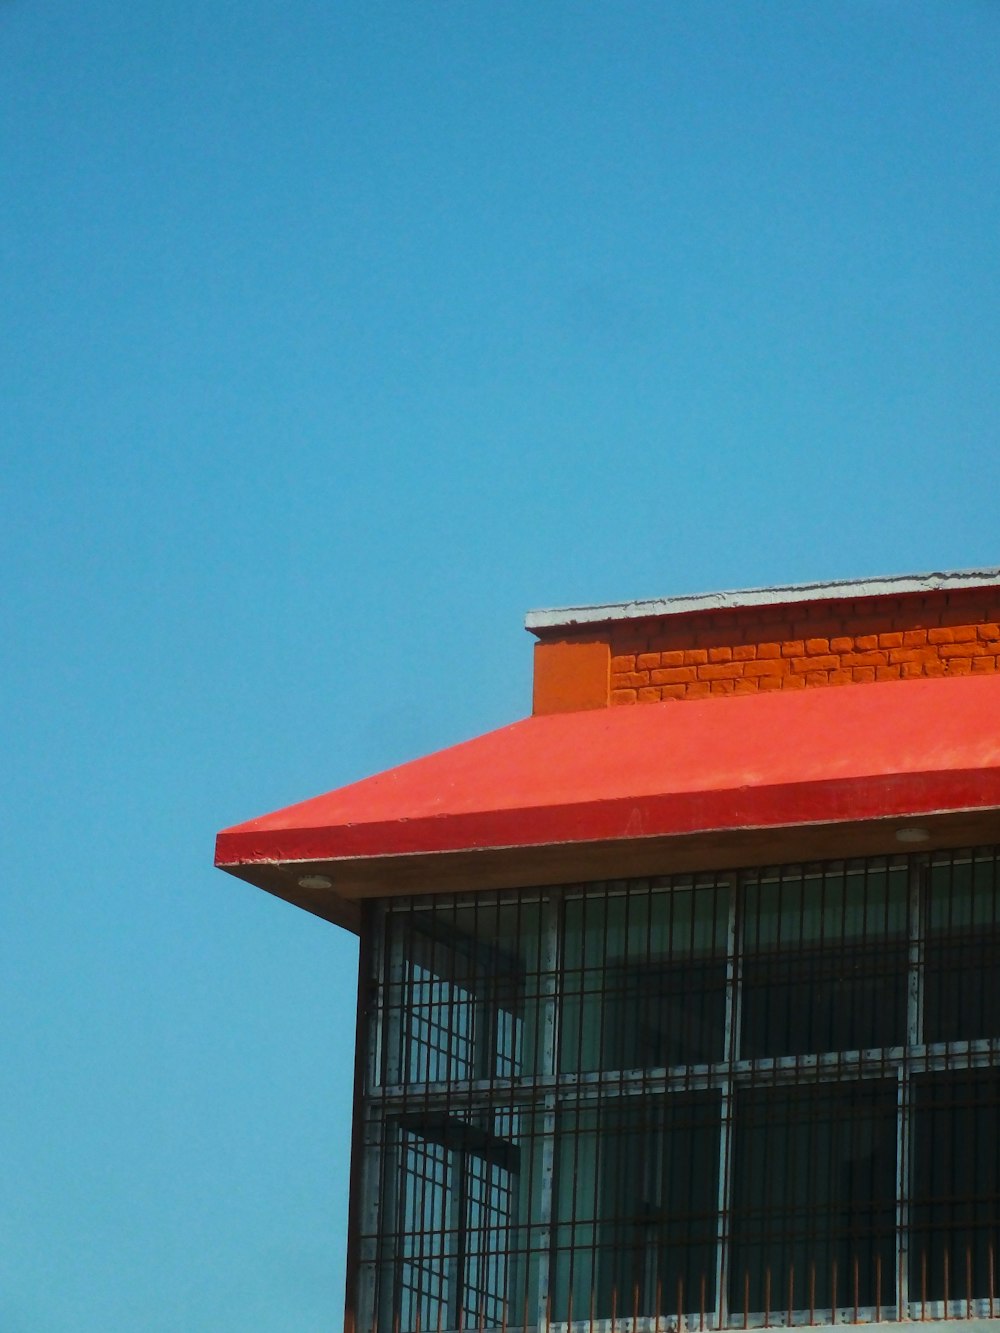 an airplane flying over a building with a red roof